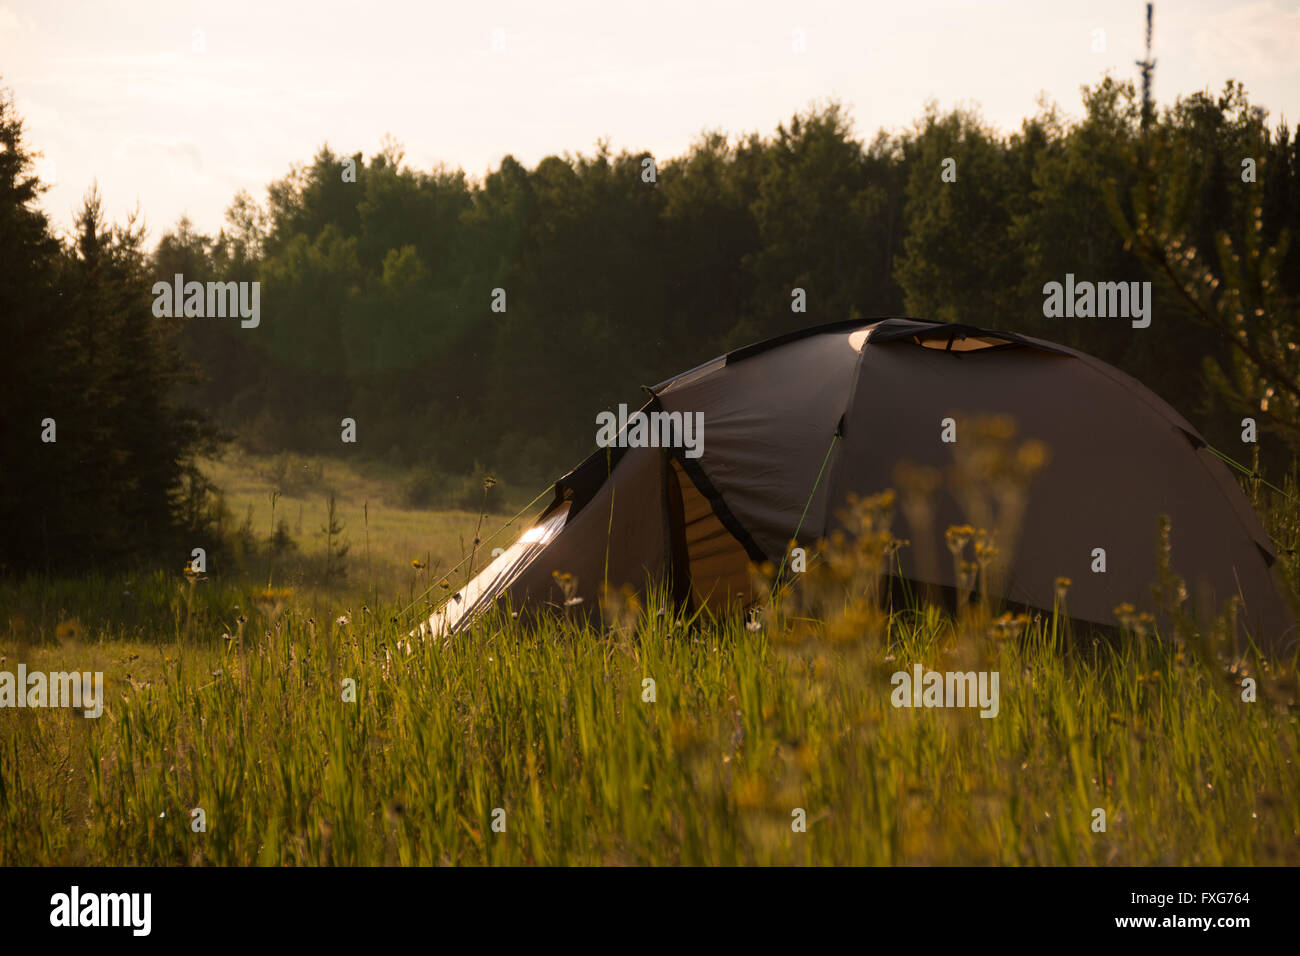 Earth brown tent in the sunset in lush green environment, Canada. Stock Photo